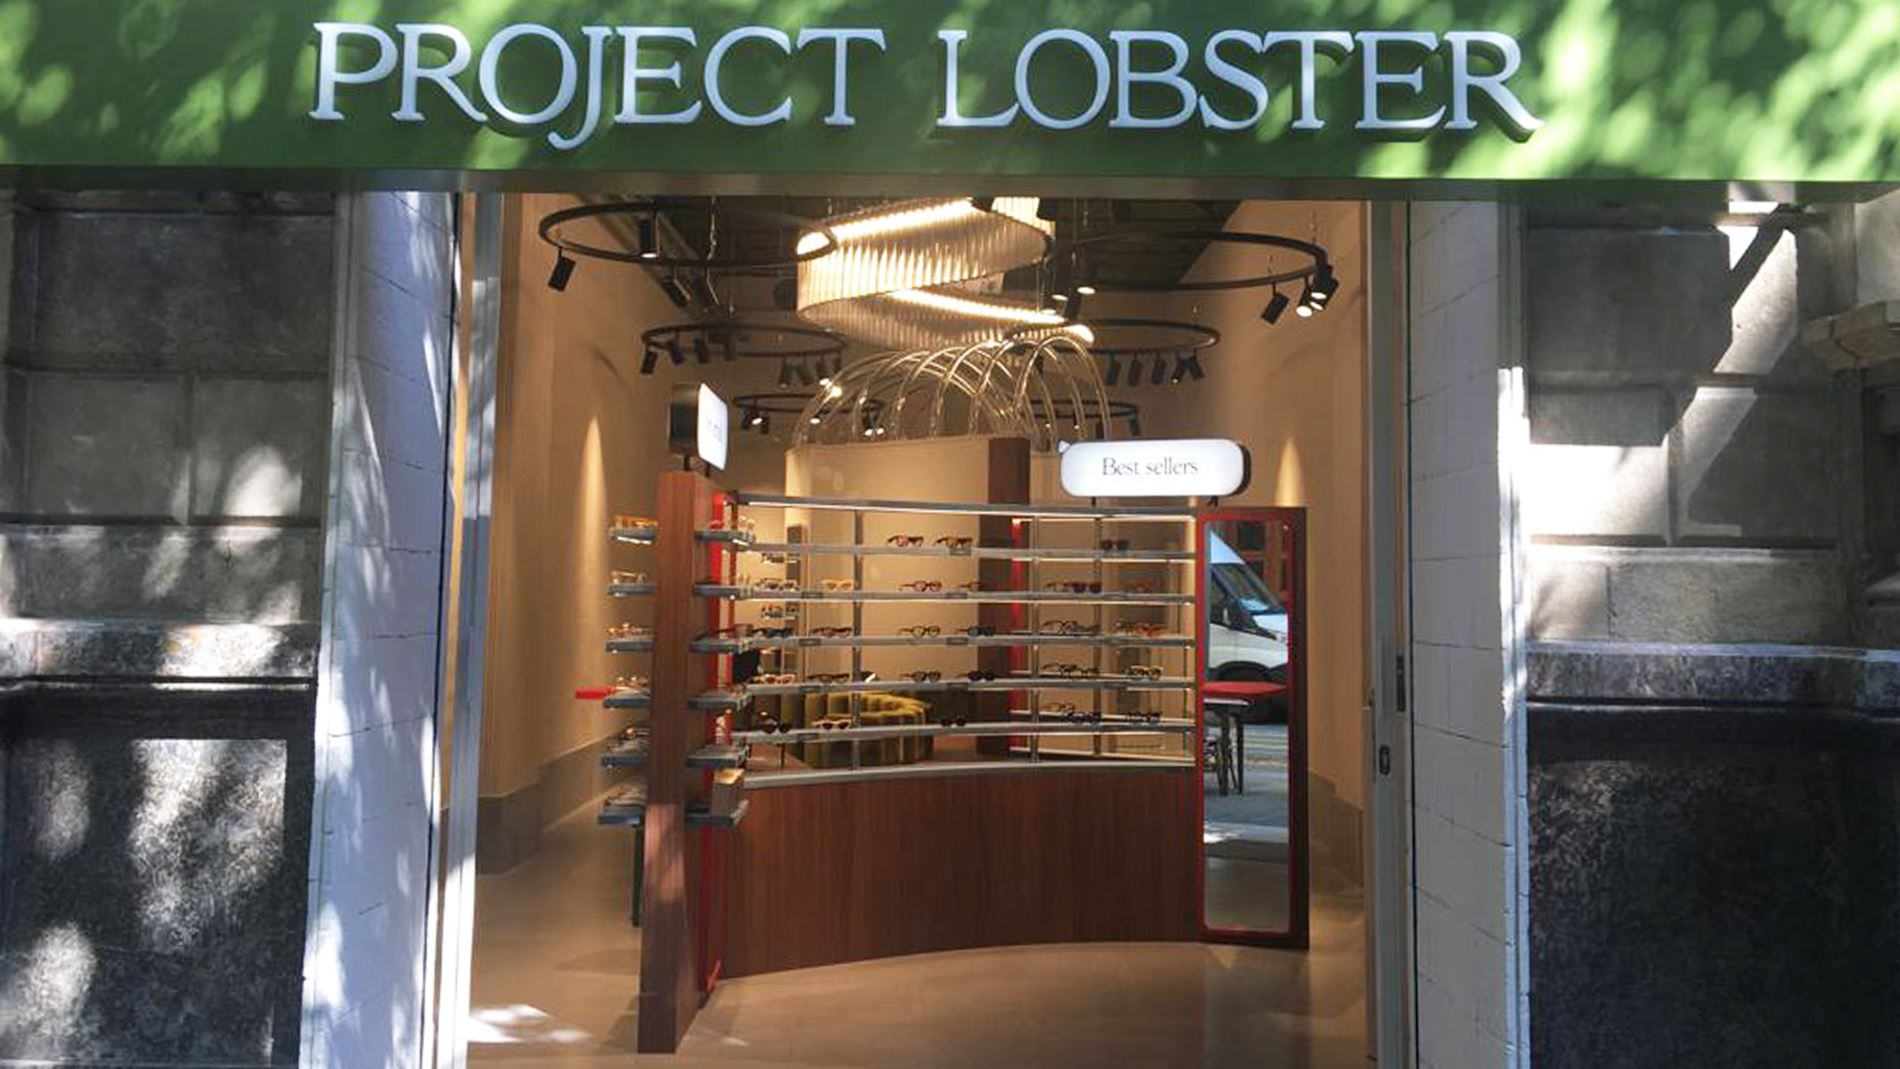 Project Lobster (Barcelona)